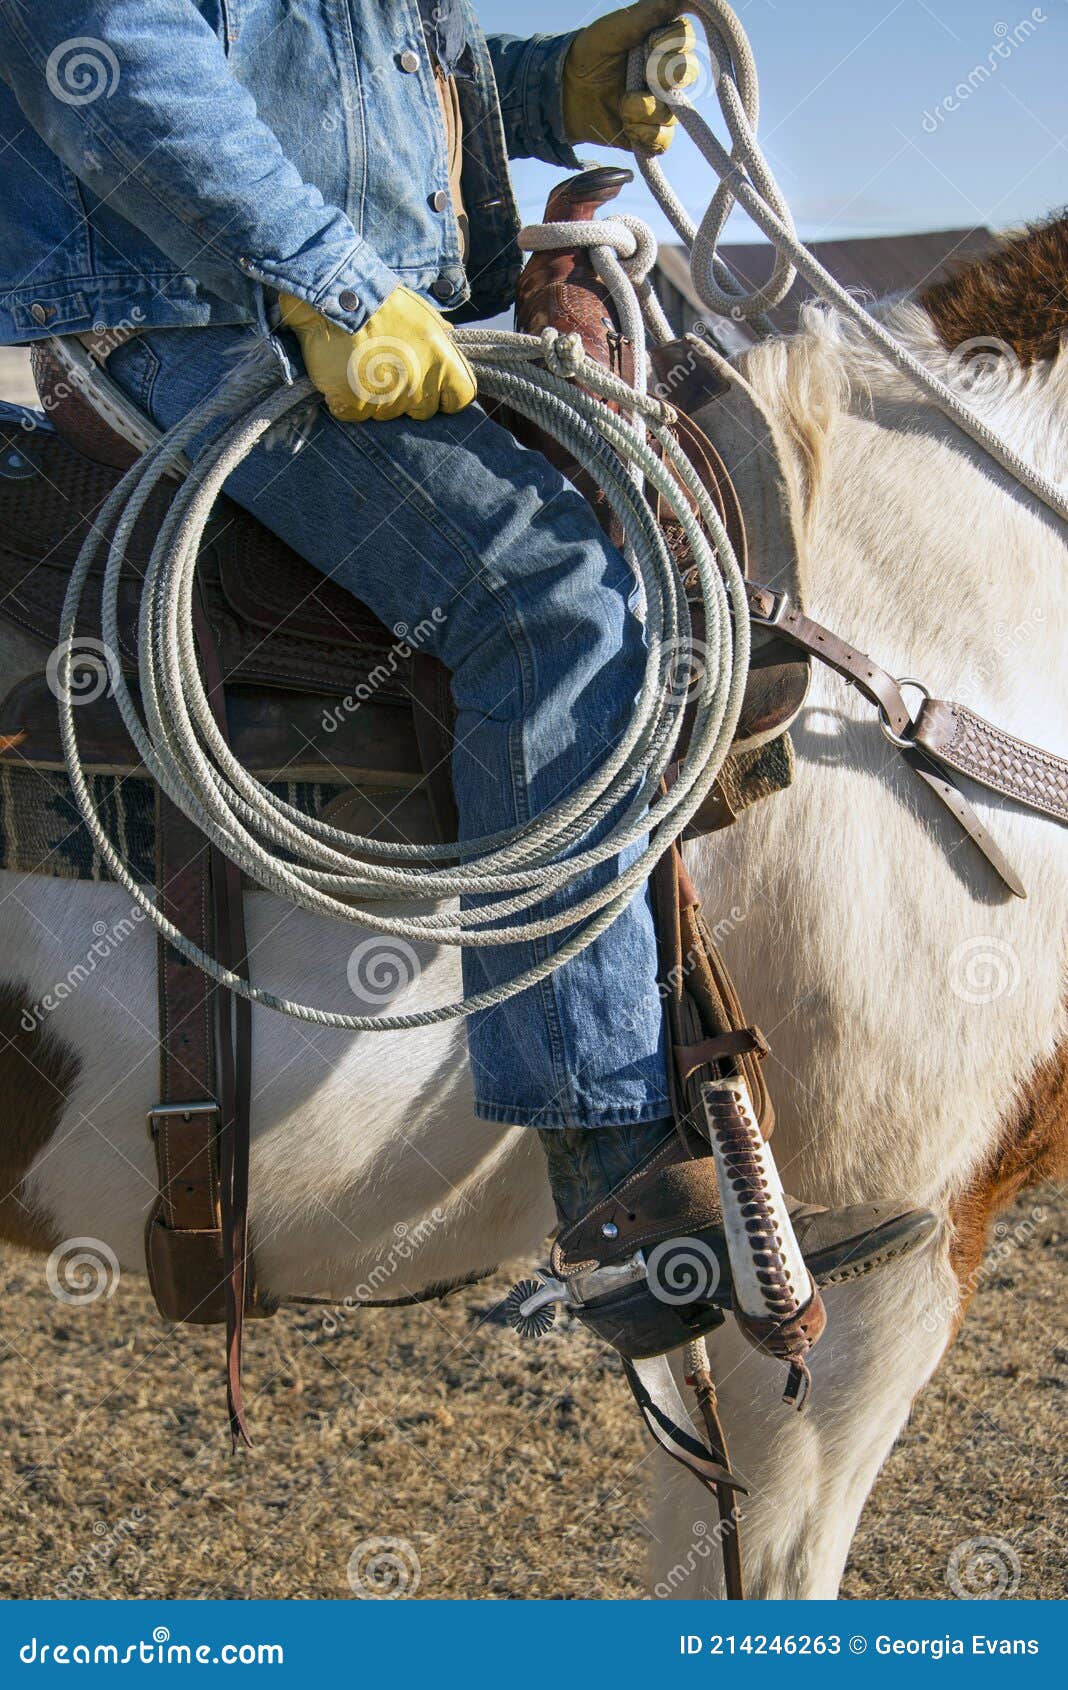 Cowboy Wrangler Ranch Hand Riding Paint Horse with Saddle, Boots and Spurs  Carrying a Lariat Rope Stock Image - Image of gloves, bandana: 214246263